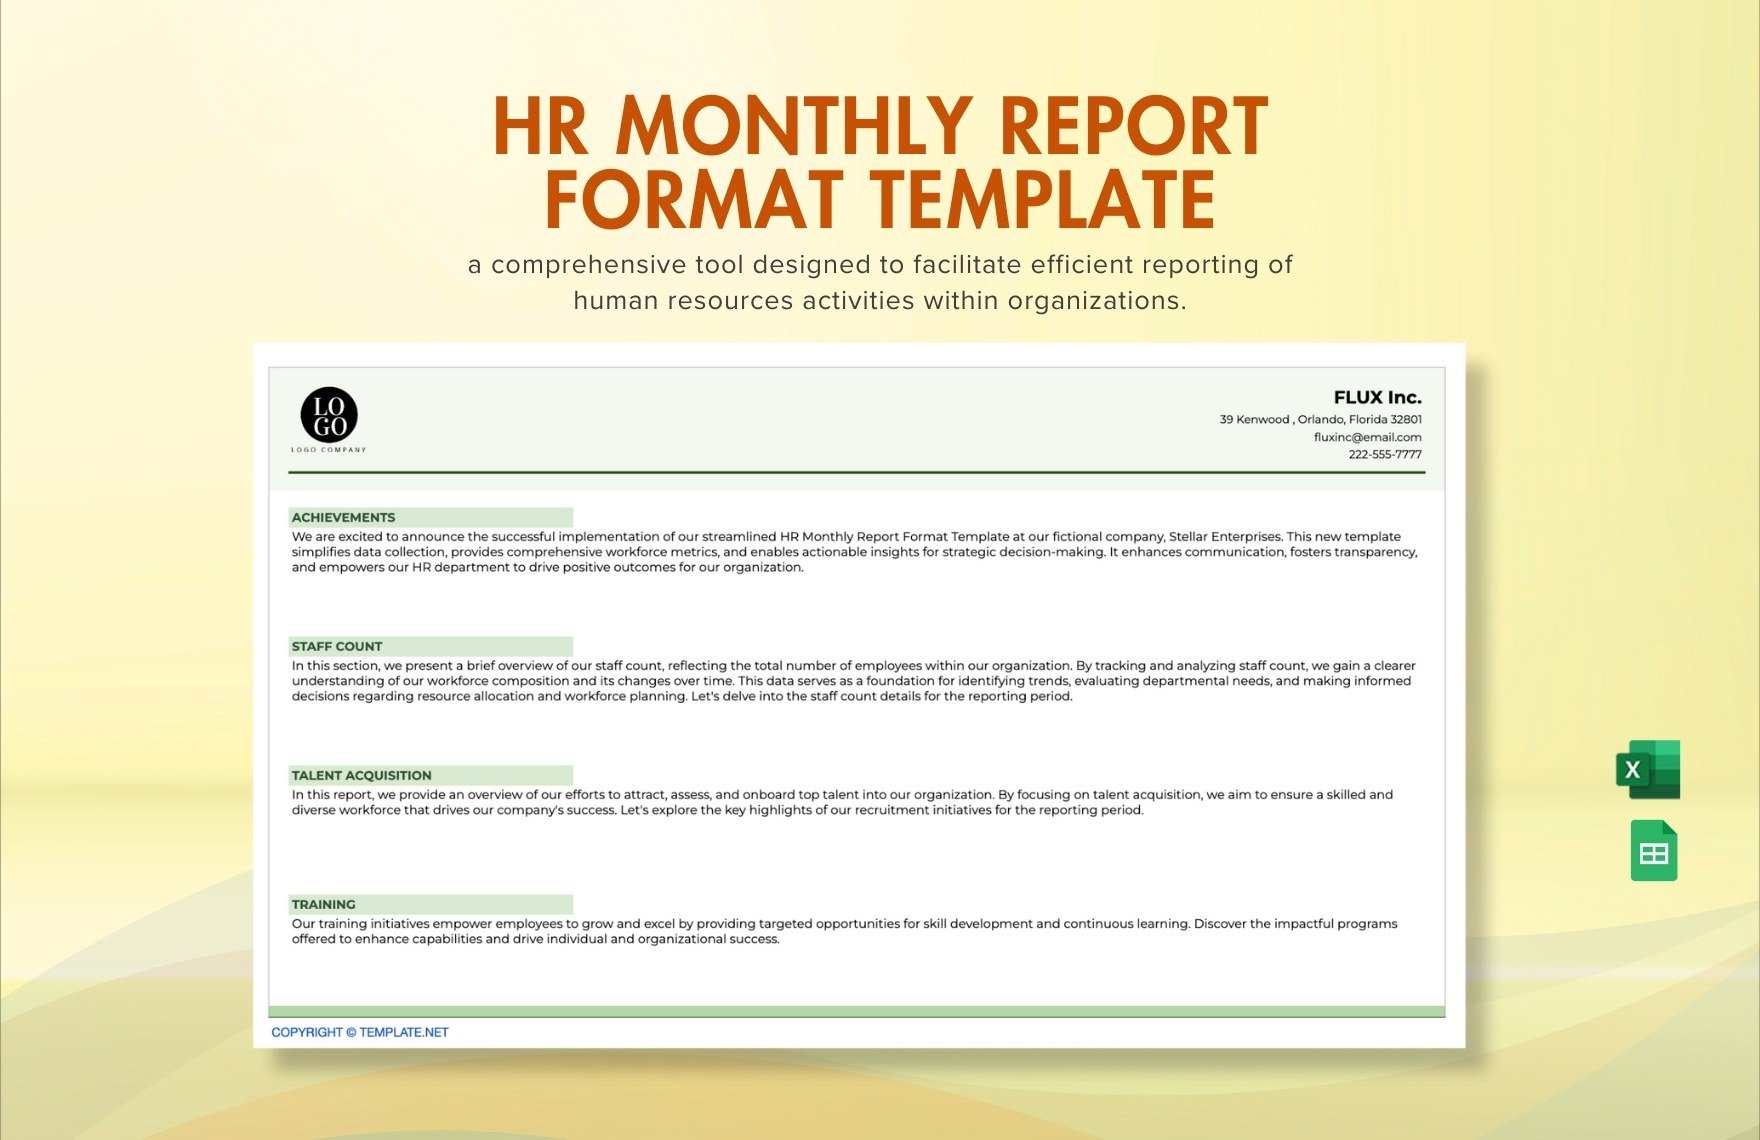 HR Monthly Report Format Template